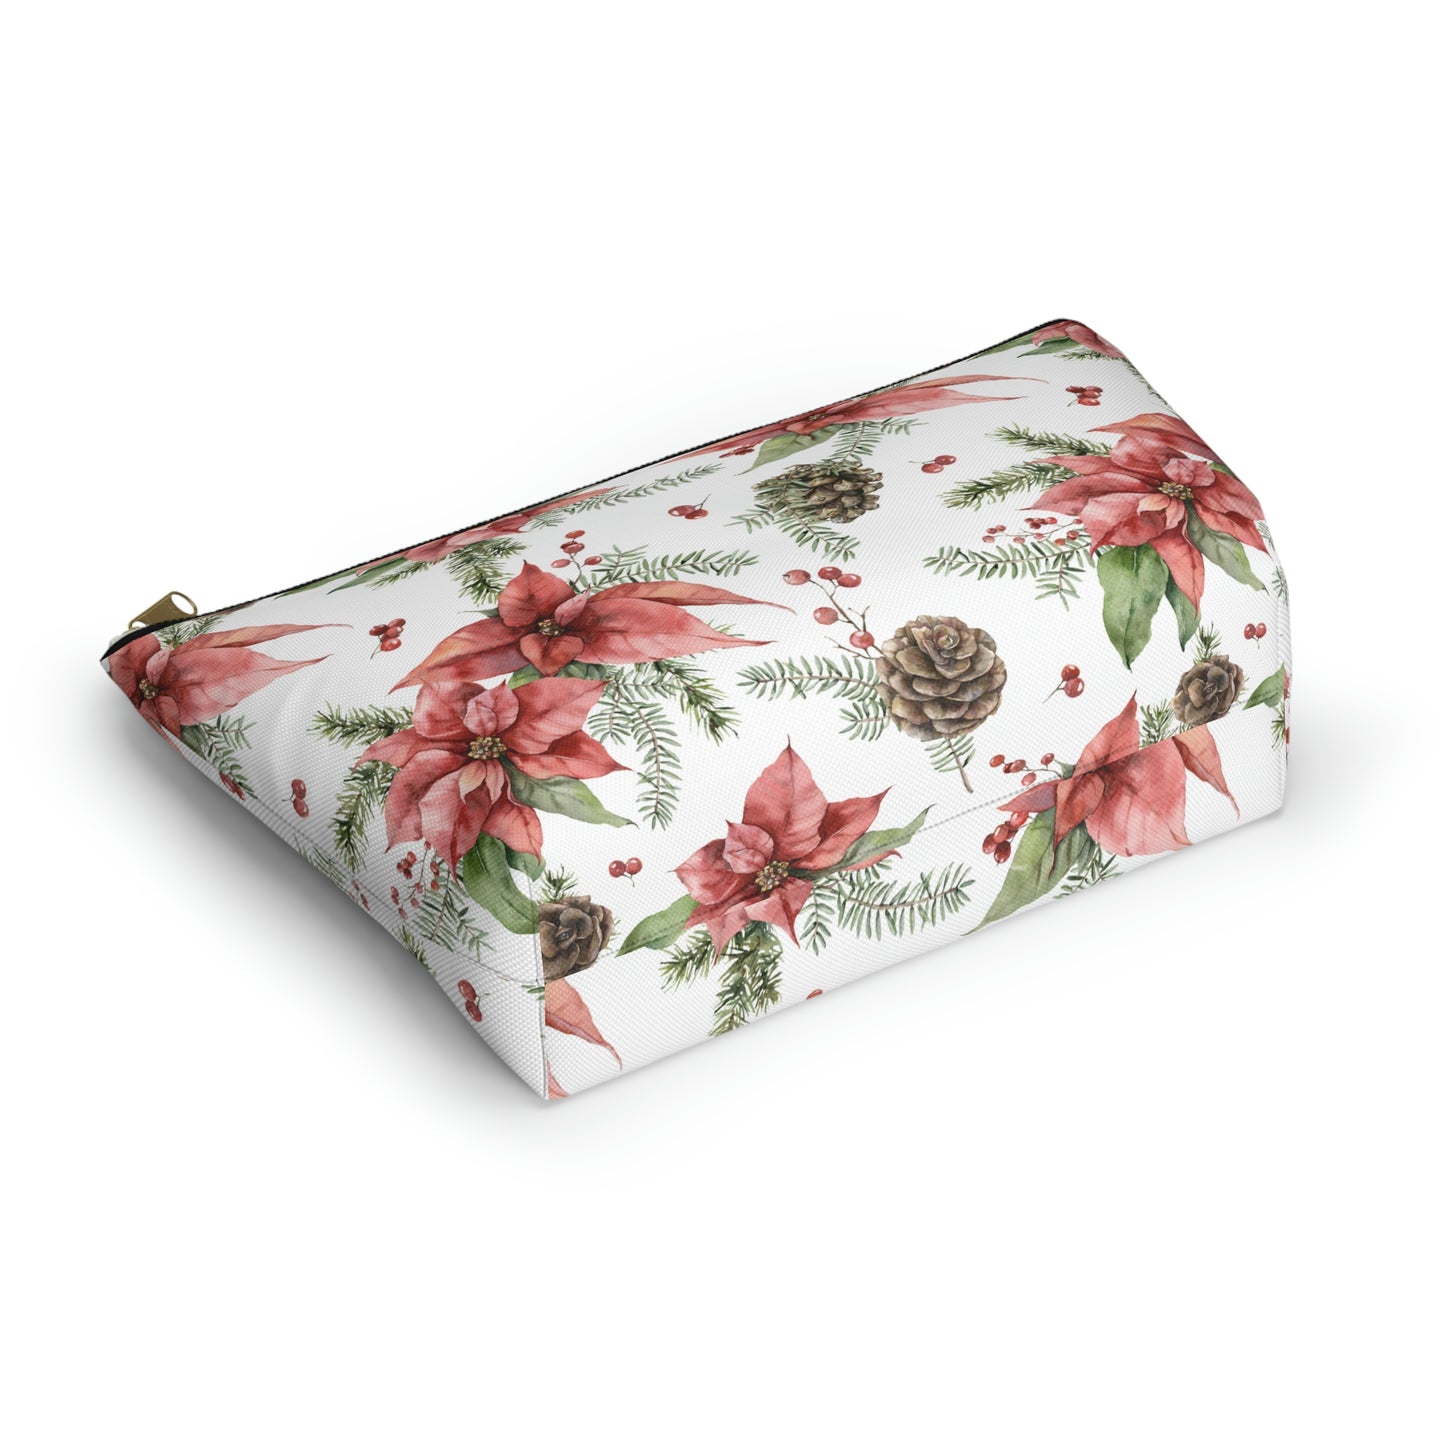 Poinsettia and Pine Cones Accessory Pouch w T-bottom